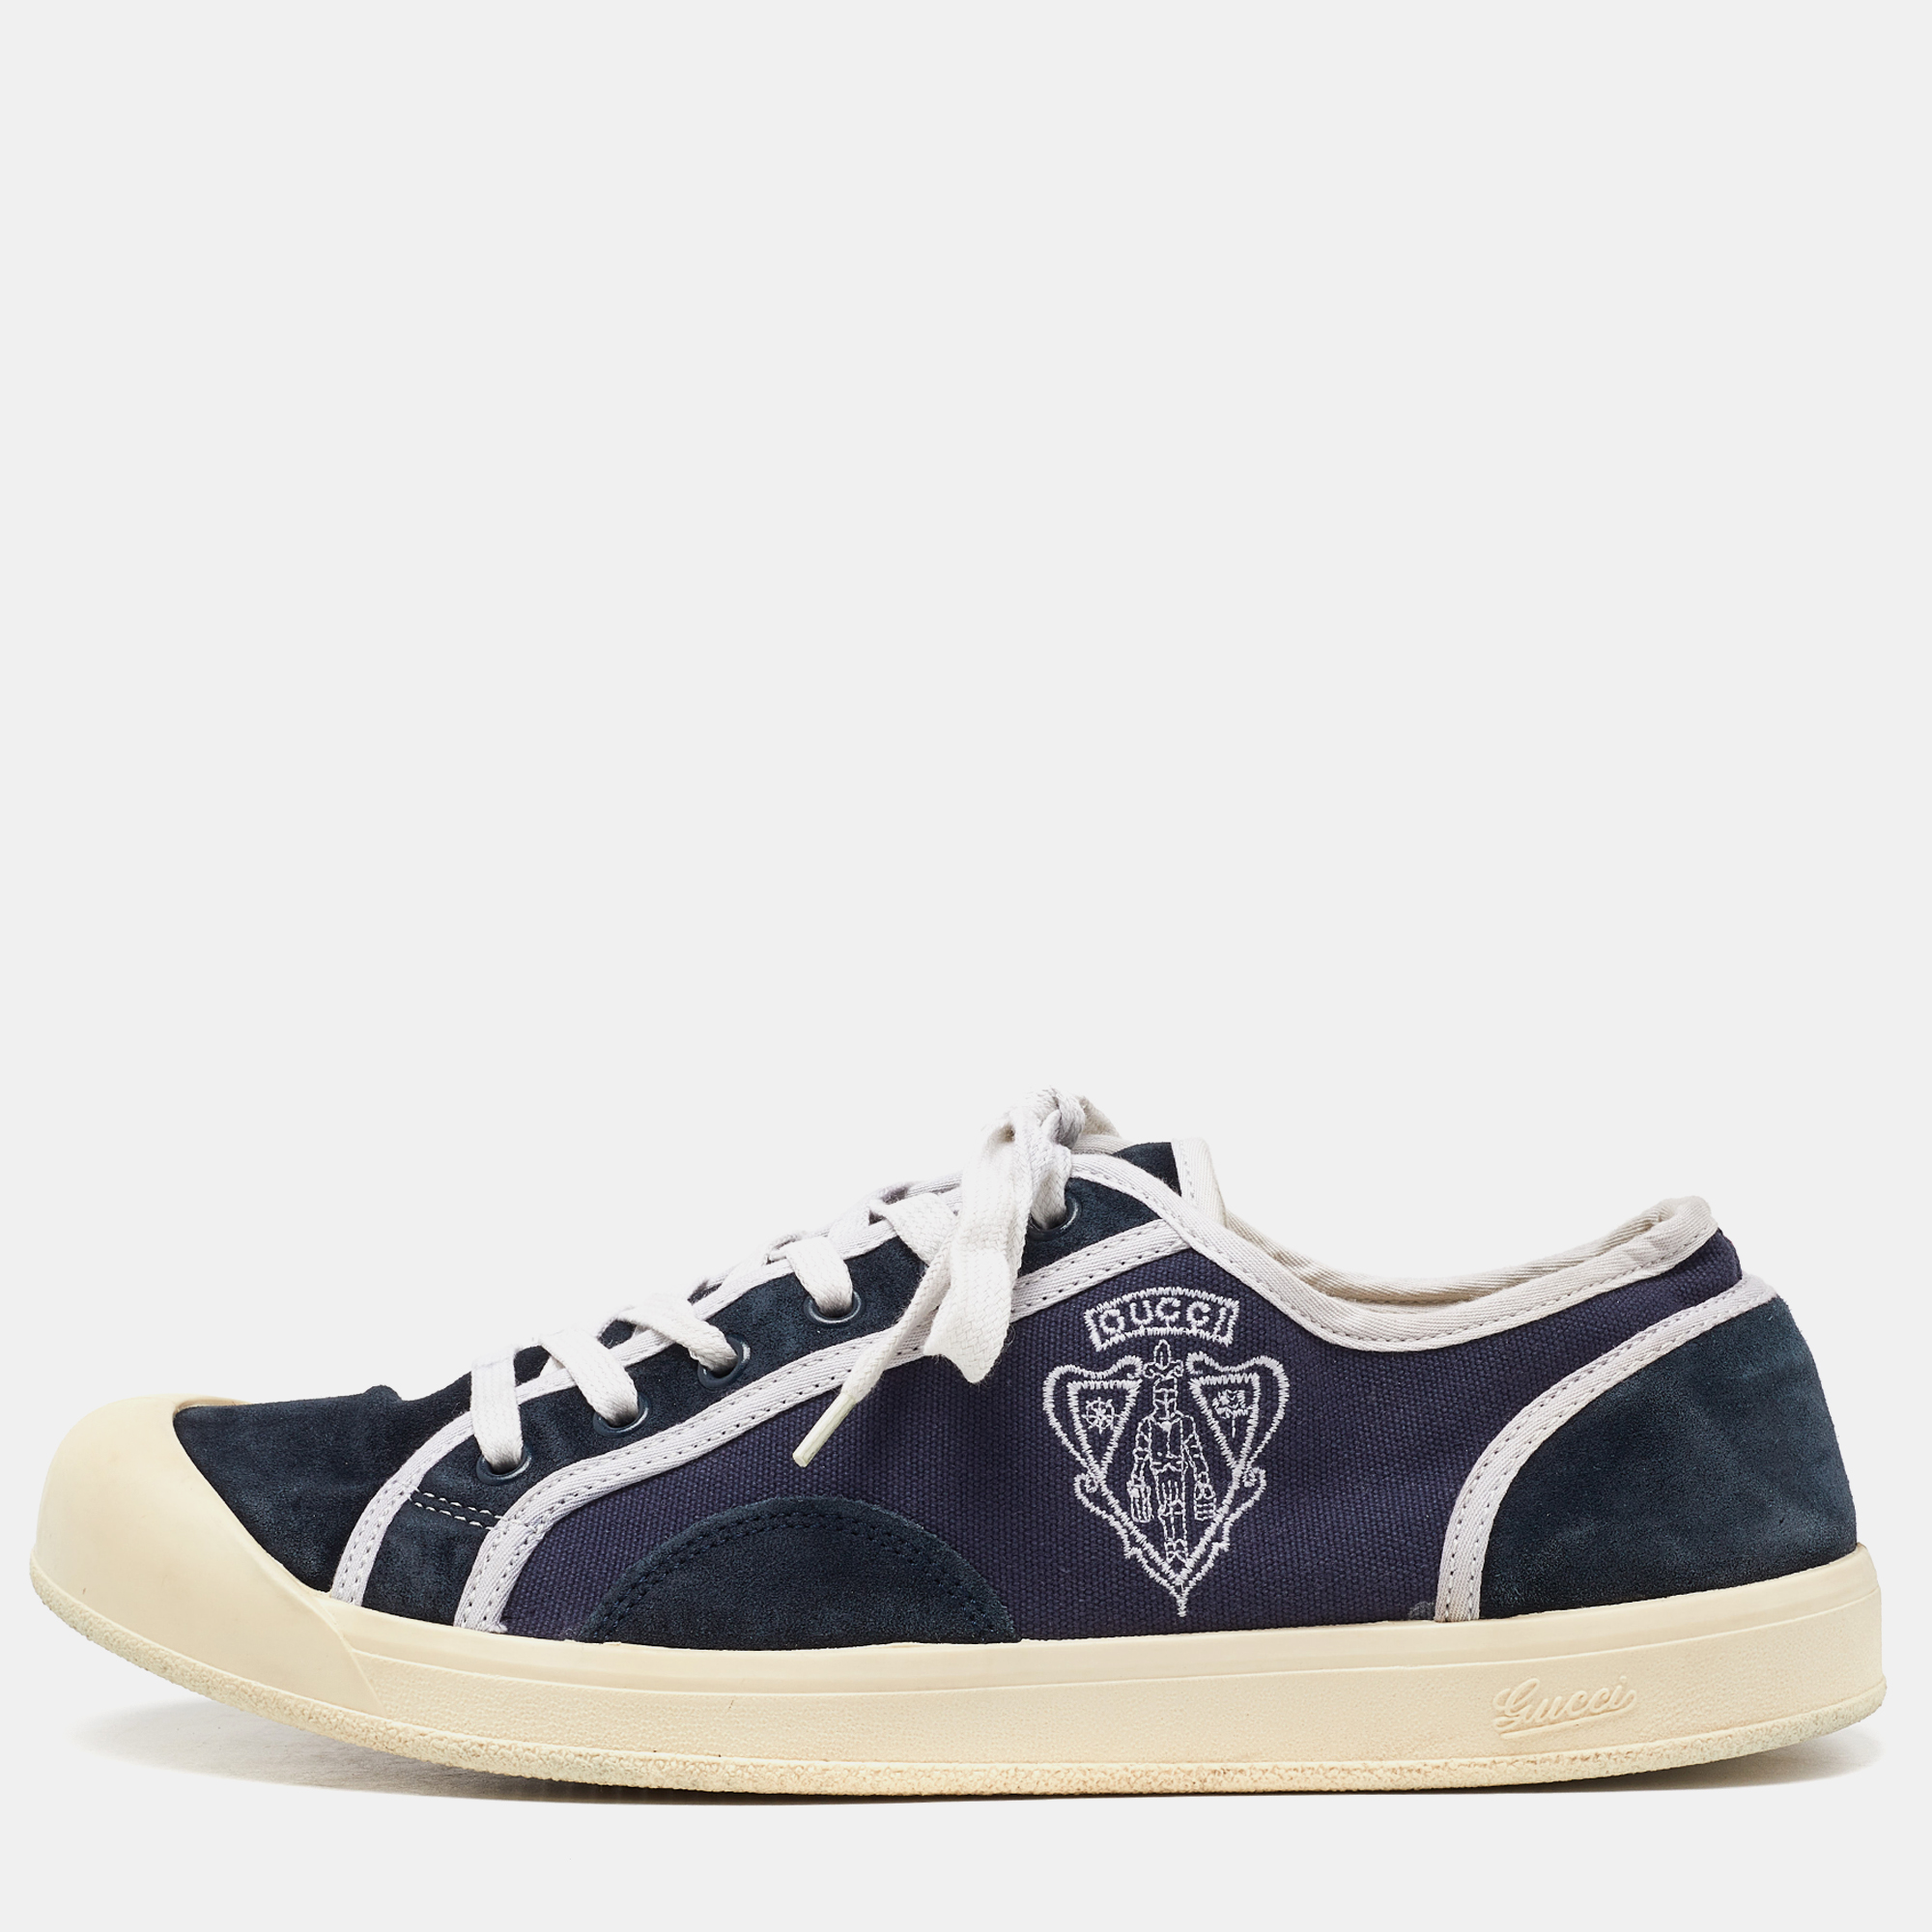 Pre-owned Gucci Navy Blue Canvas And Suede Signature Crest Sneakers Size 42